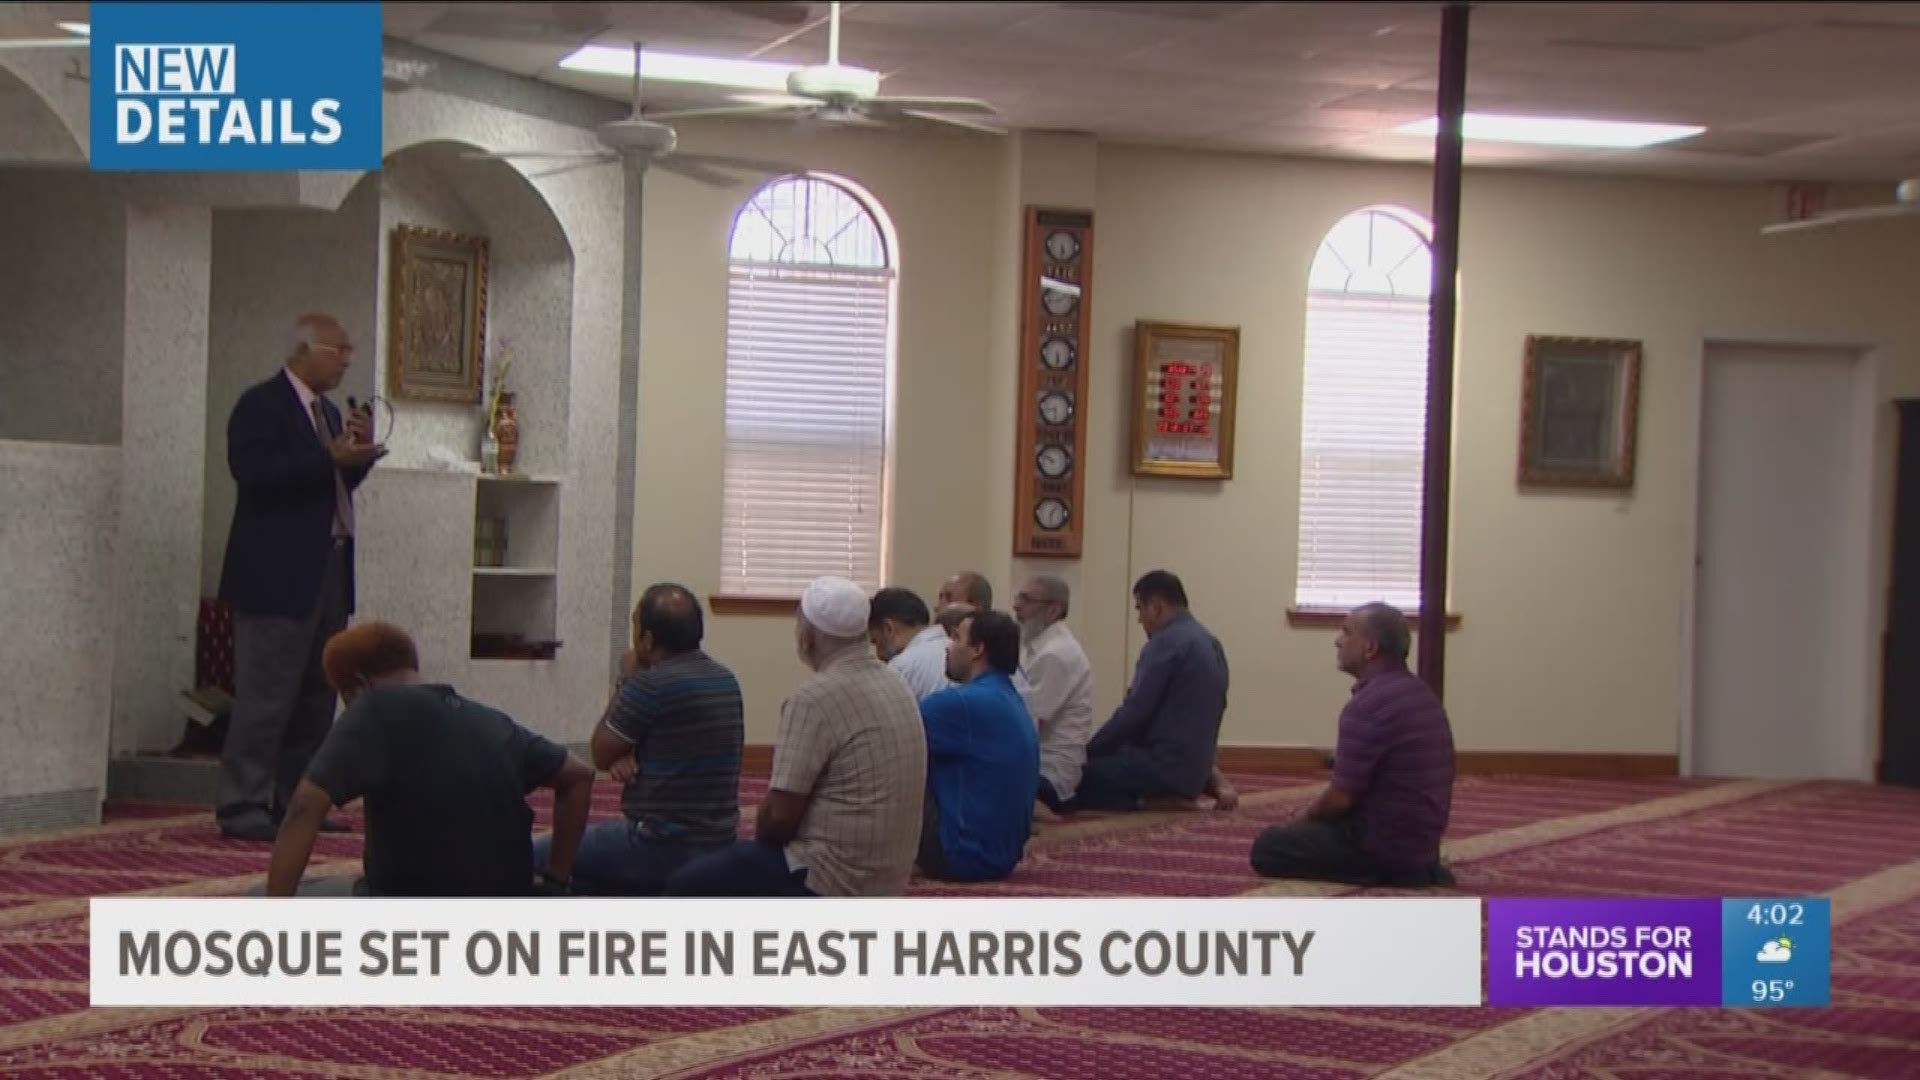 A Muslim community in east Harris County is looking for answers after a mosque was set on fire early Thursday morning. 